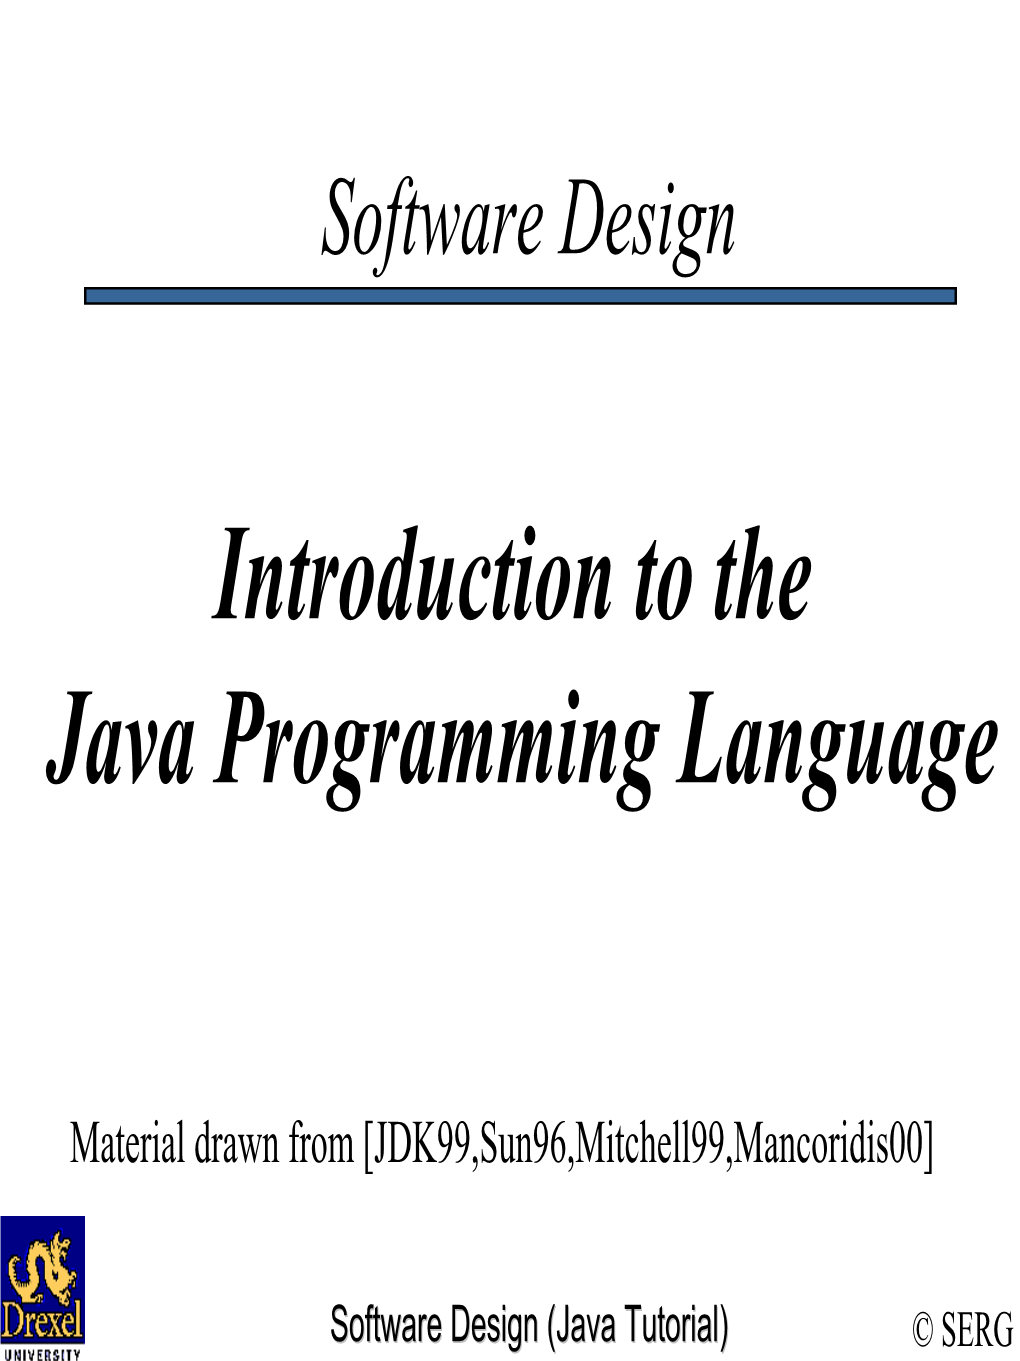 Introduction to the Java Programming Language